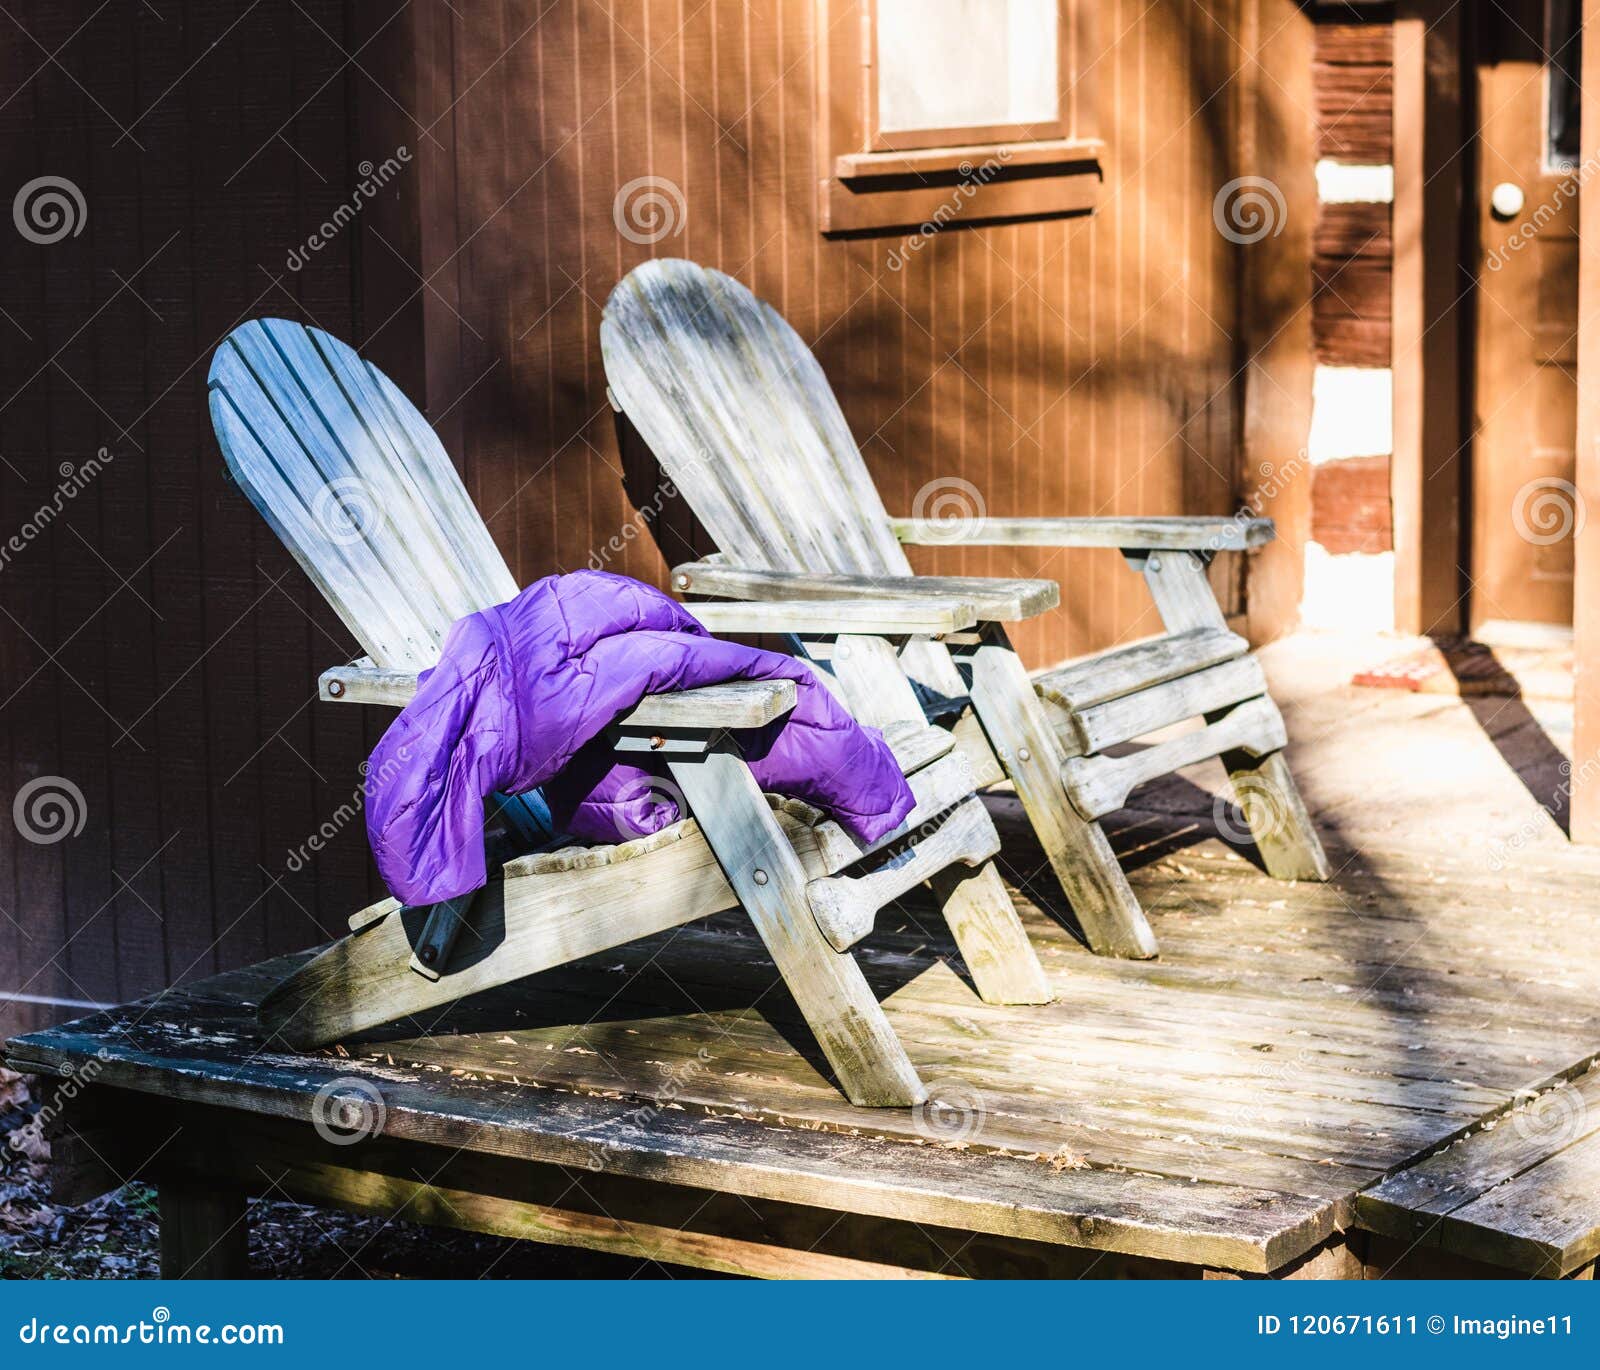 Two Aqua Adirondack Chairs On A Cabin Porch Stock Image Image Of